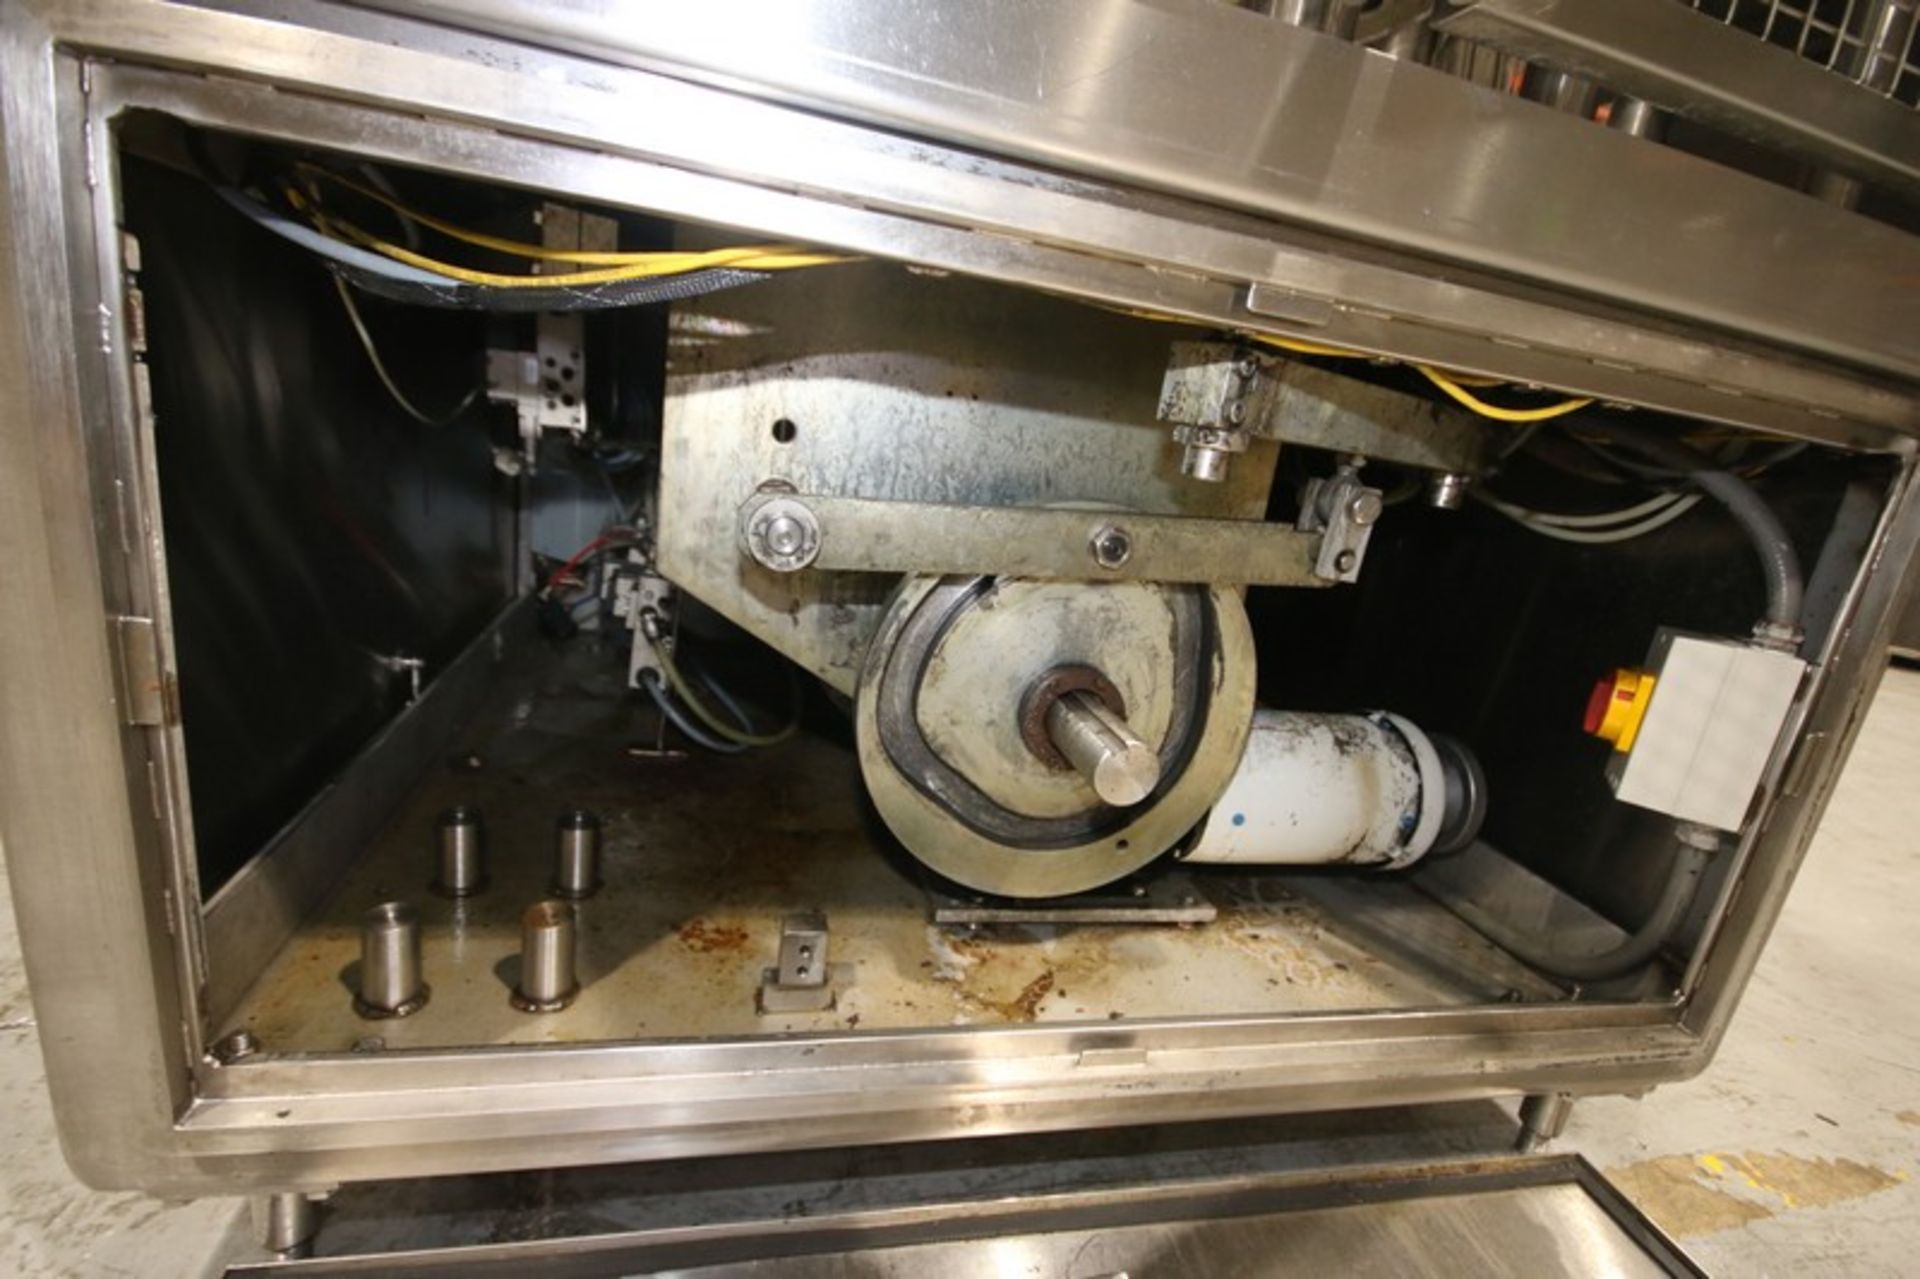 Osgood S/S Rotary Cup Filler, Model 2001-R, SN 232-790, with Filler Bowl, Cup Denester, 2-Head - Bild 14 aus 16